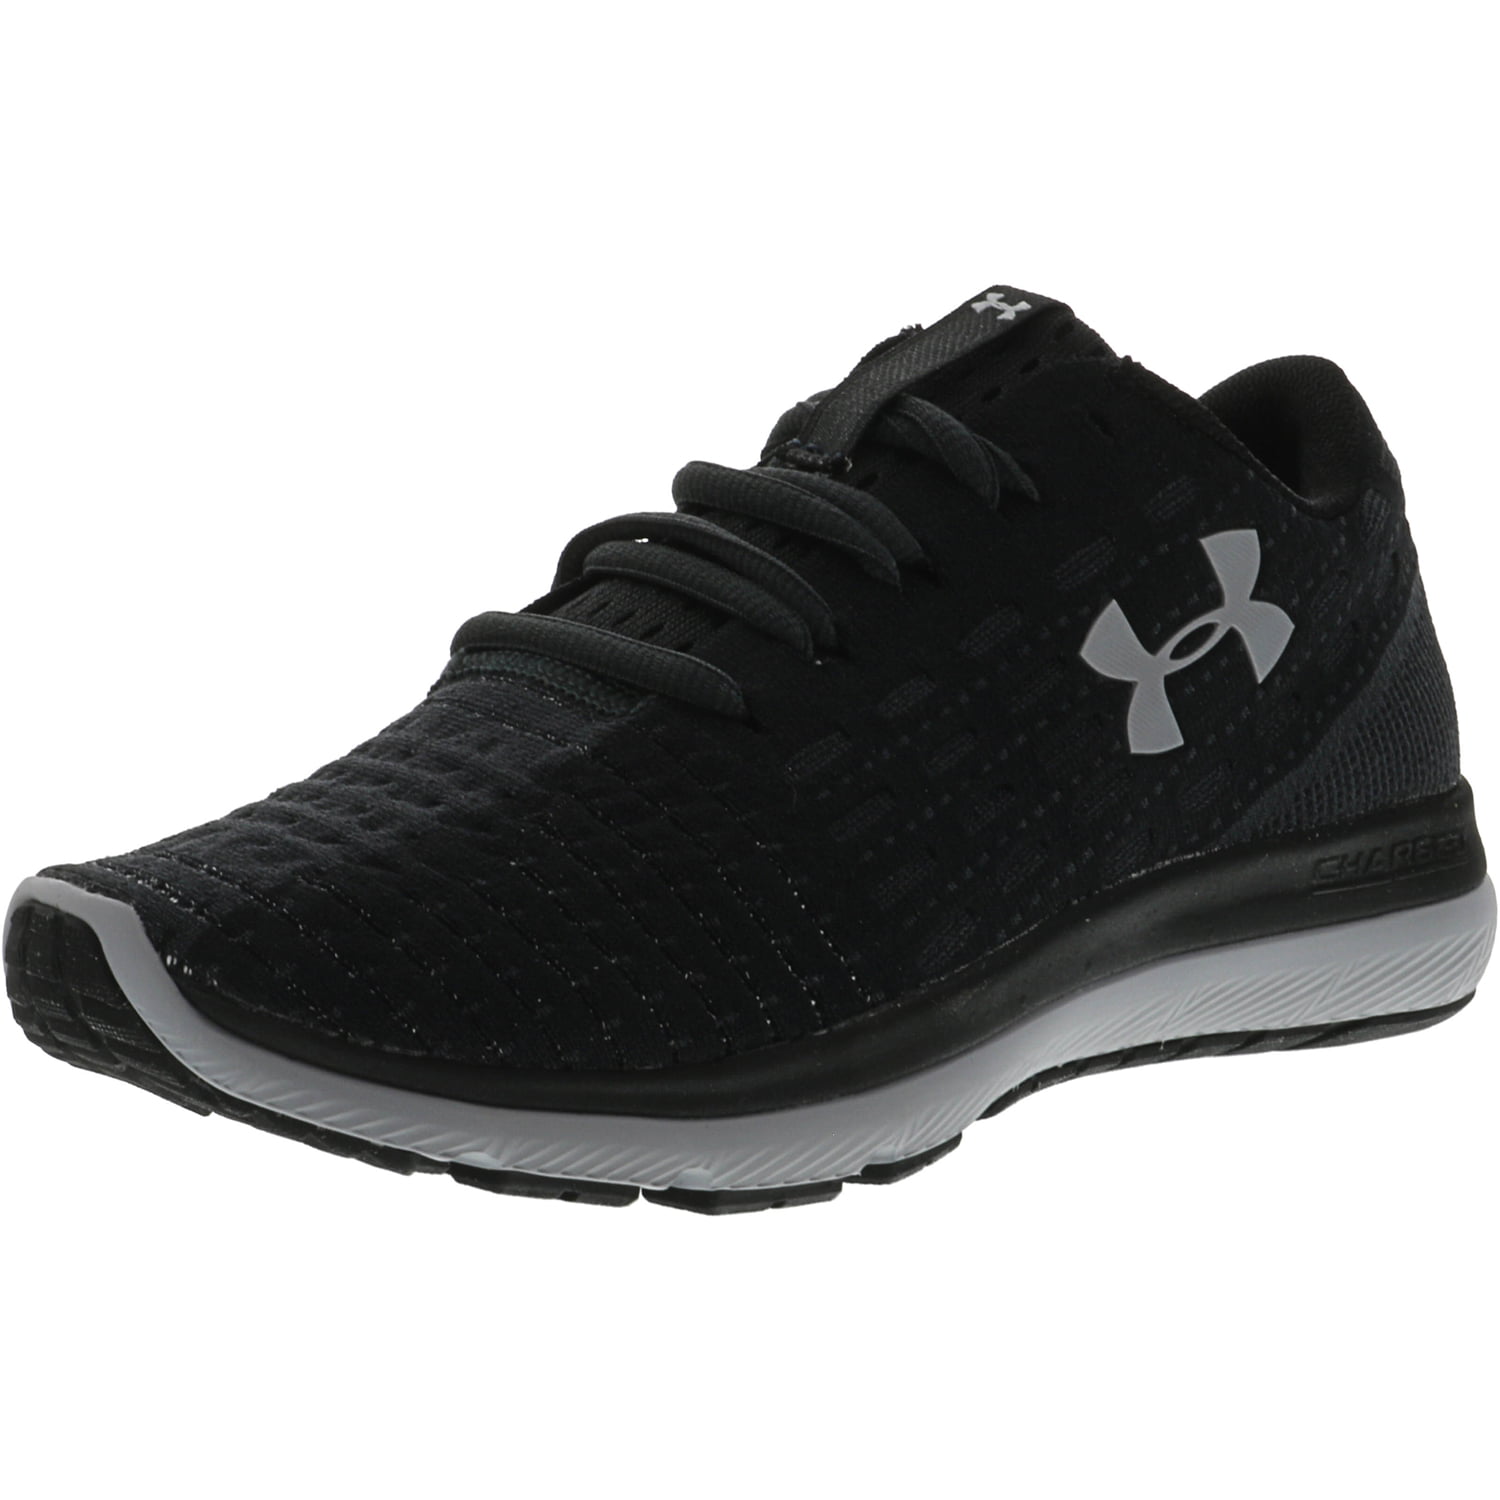 Under Armour Women's Slingflex Black / Anthracite Overcast Gray Ankle ...